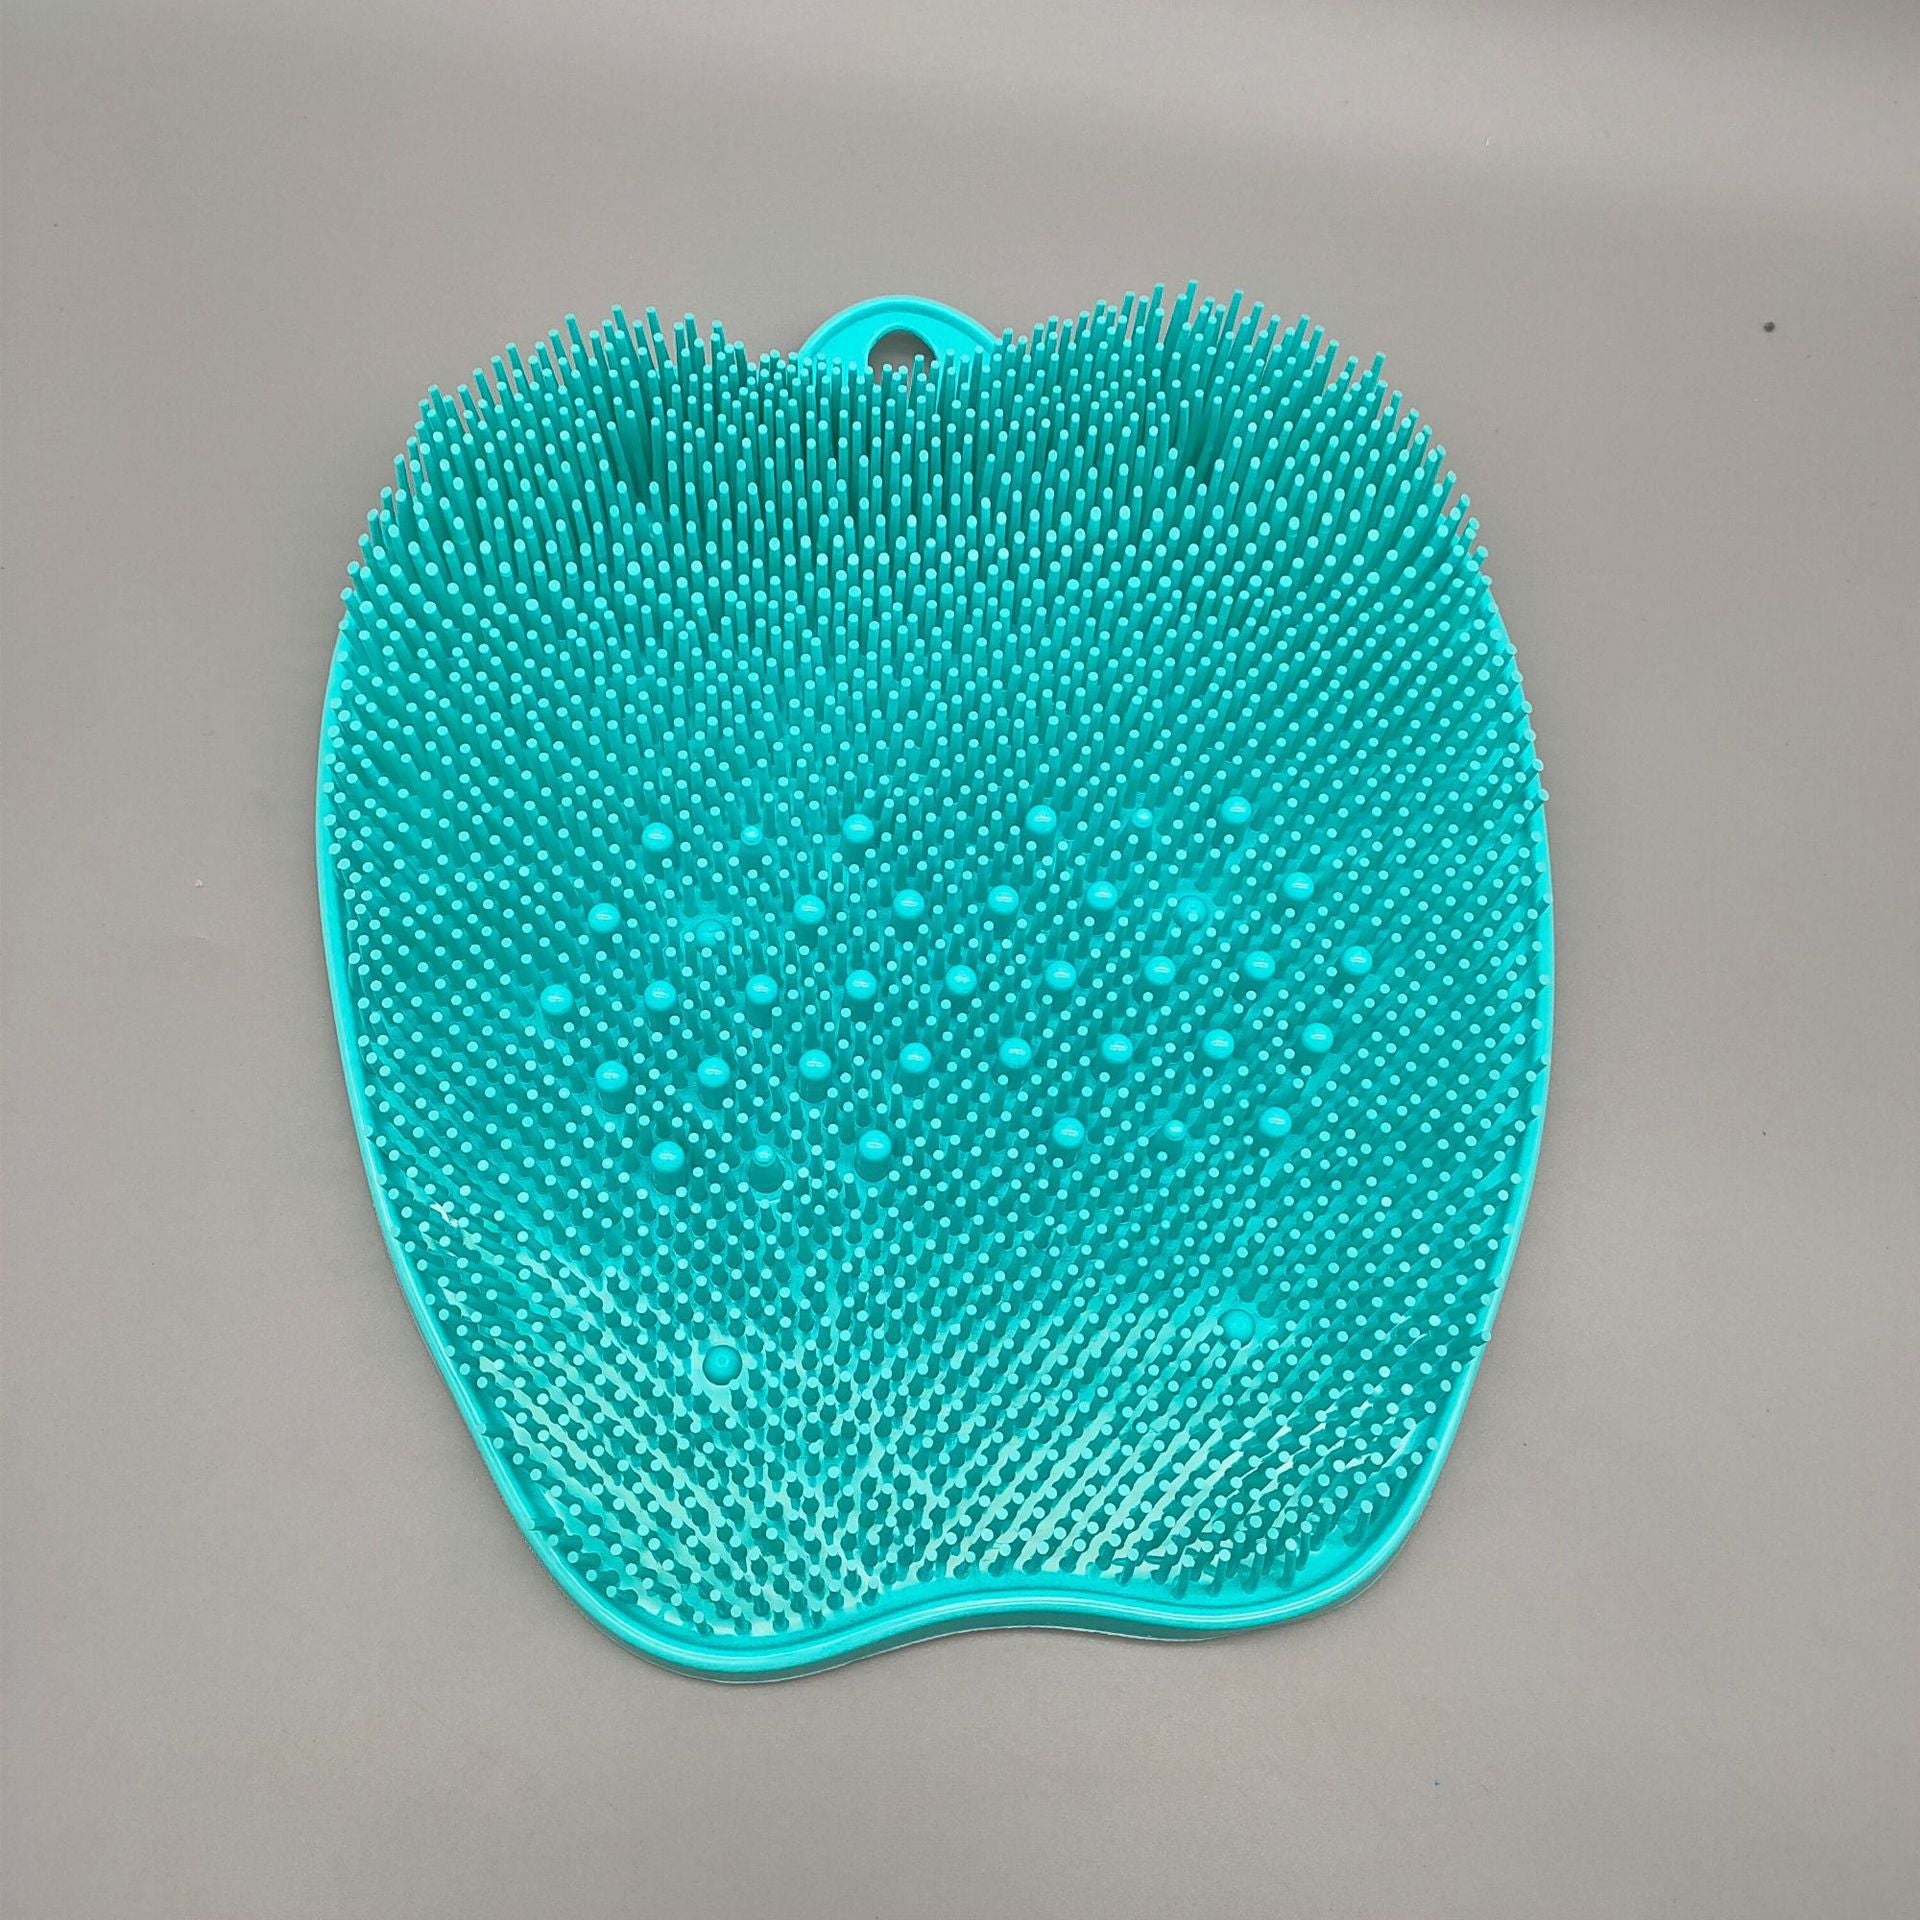 Importikaah-foot-scrubber-innovative-foot-hygiene-tool-designed-cleansing-exfoliation-feet